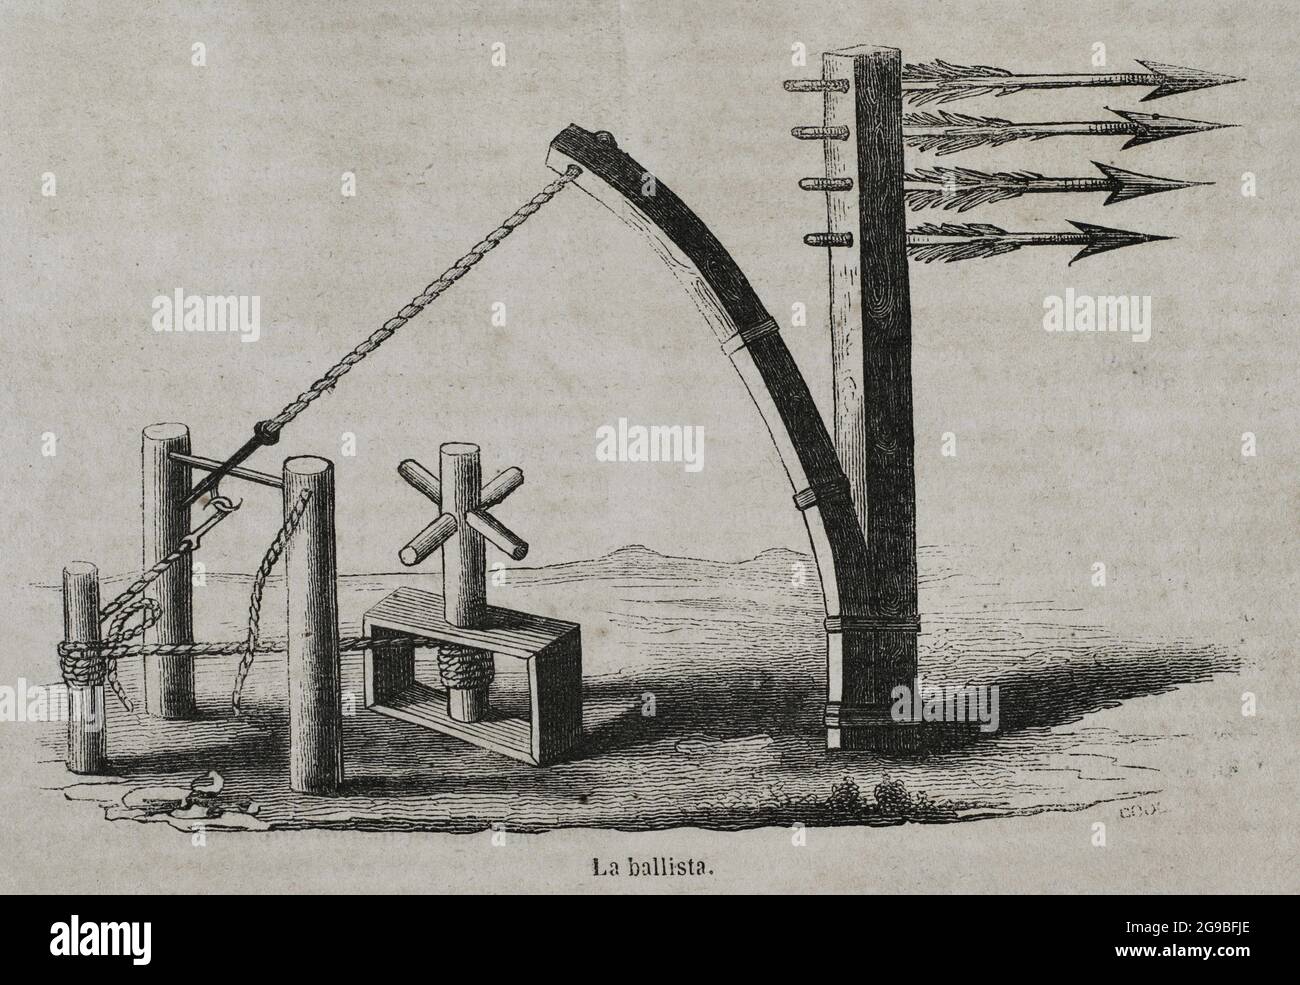 Ancient times. The ballista or bolt thrower. Ancient siege weapon that threw arrows, darts and javelins to distant targets. Engraving. Historia General de España by Father Mariana. Madrid, 1852. Stock Photo